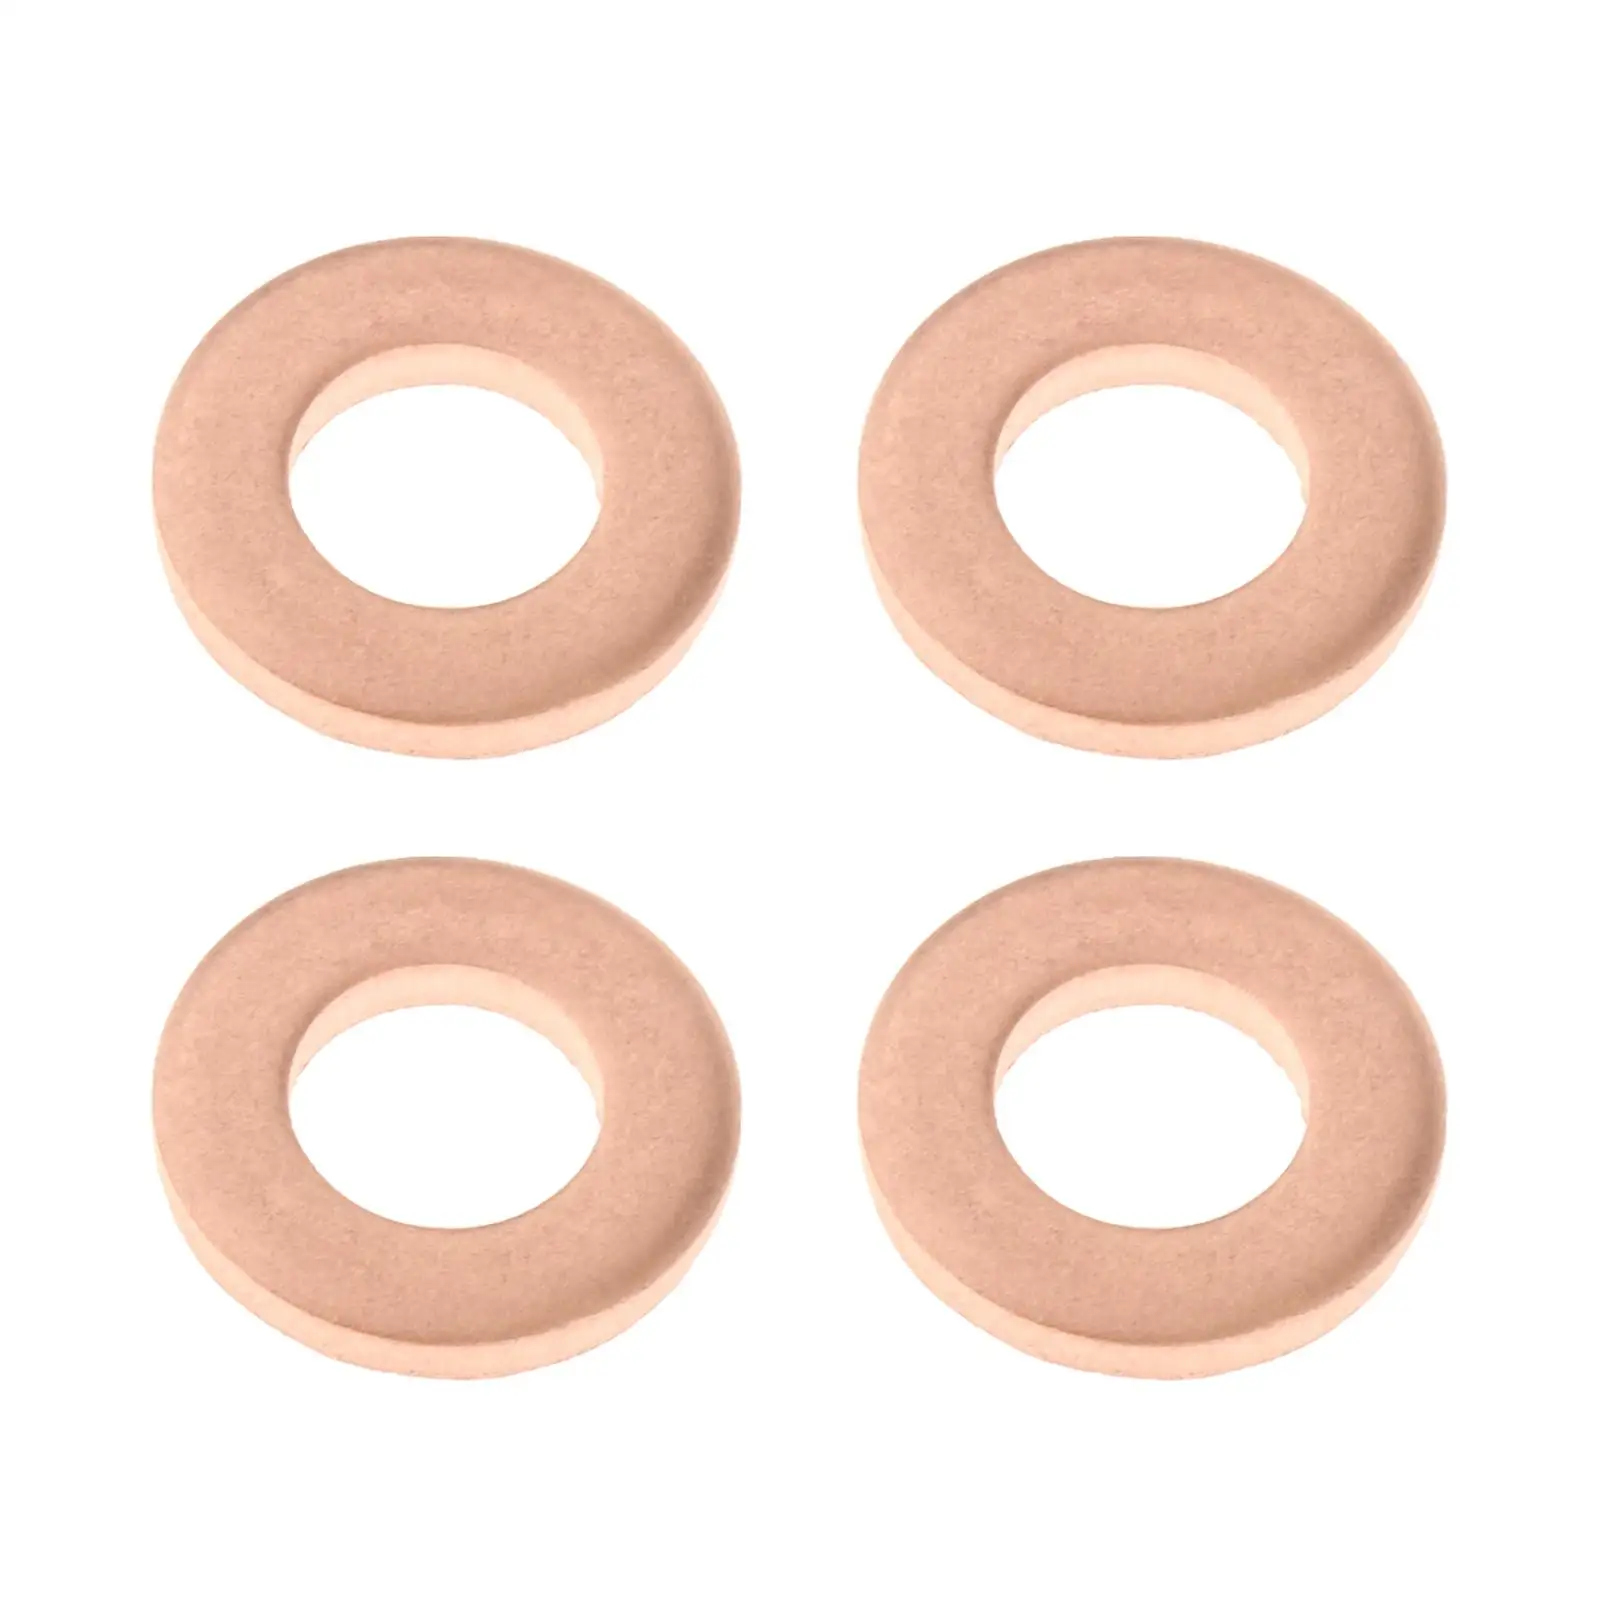 Fuel Injector Seal Copper Washer 4pcs for Ford Transit MK7 2.2 2.4 3.2 2006 Car Styling